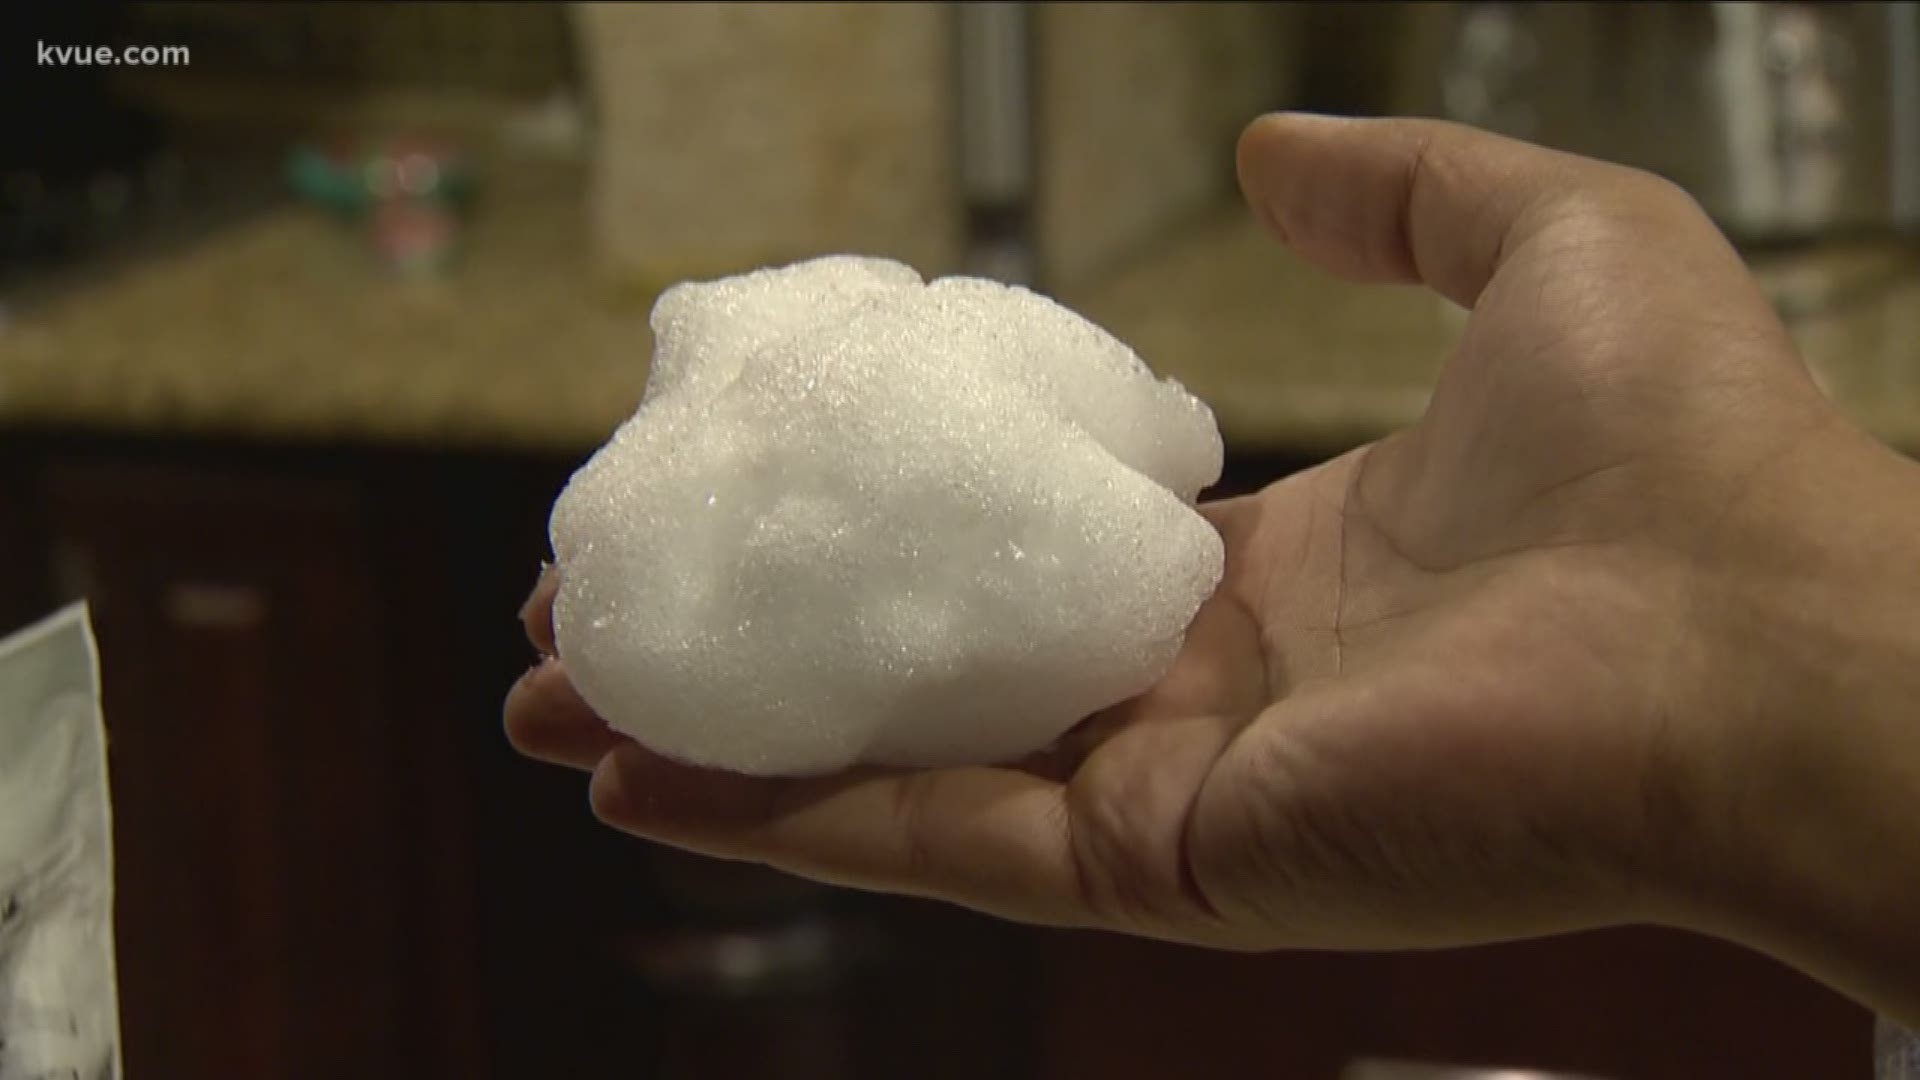 If you were to look in most people's freezers, you'd probably find some ice, frozen foods, maybe some ice cream. But Round Rock resident, Dante Neal, has something a little different in his: a snowball that's now one year old! He says that 2017 was the fi